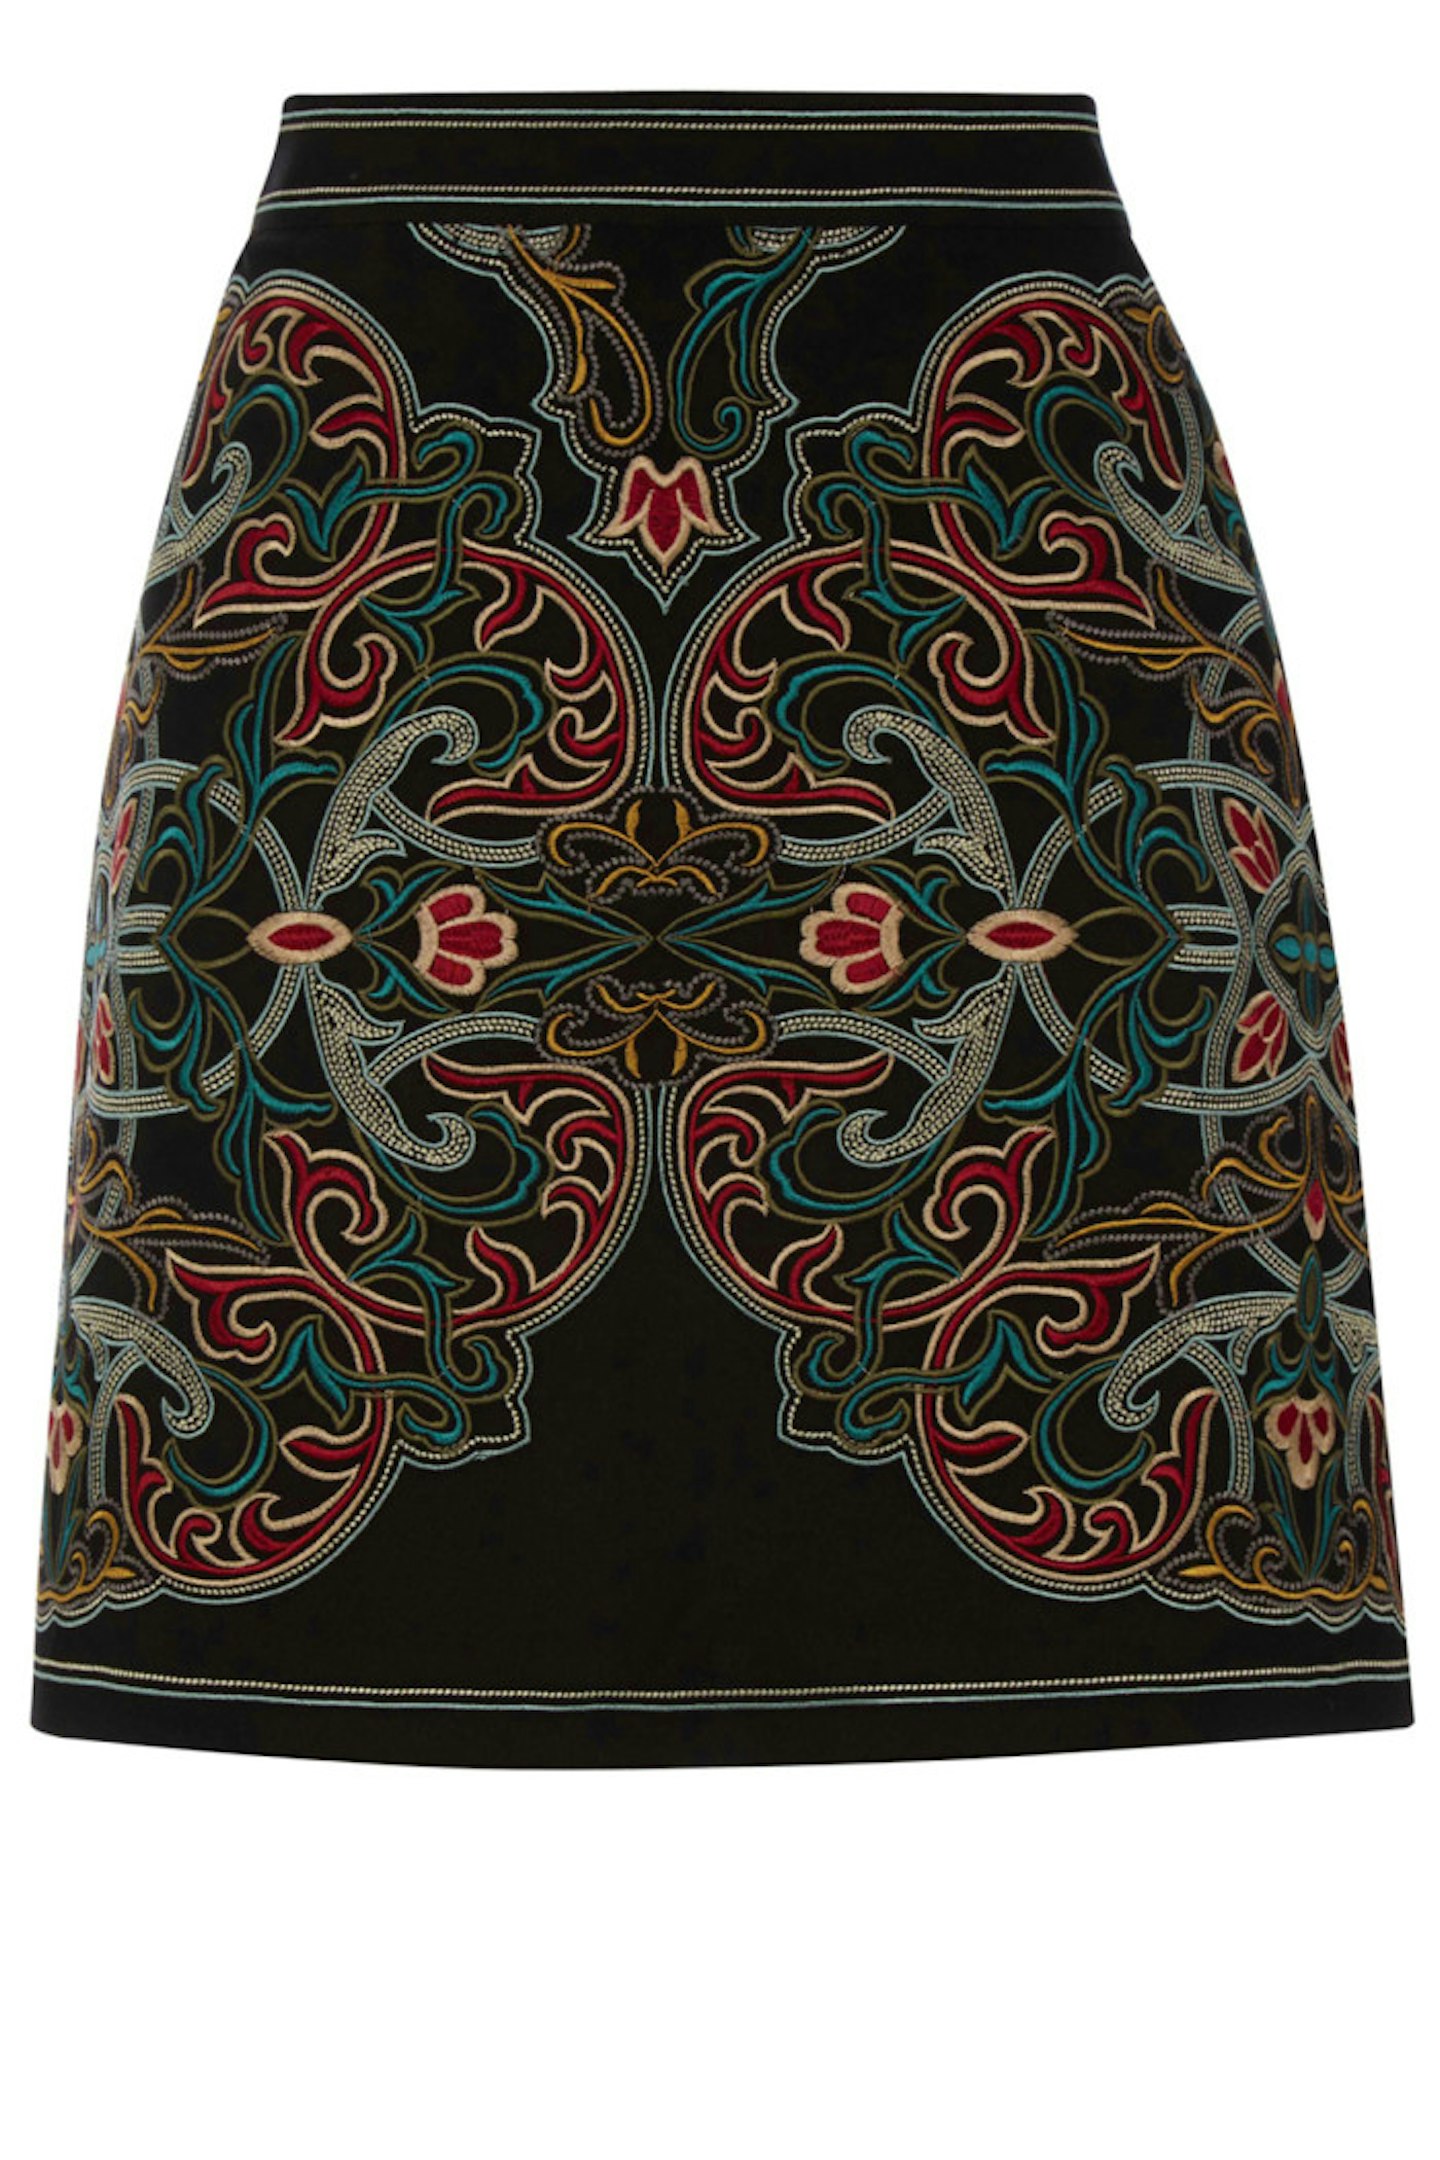 Warehouse embroidered skirt, £65.00